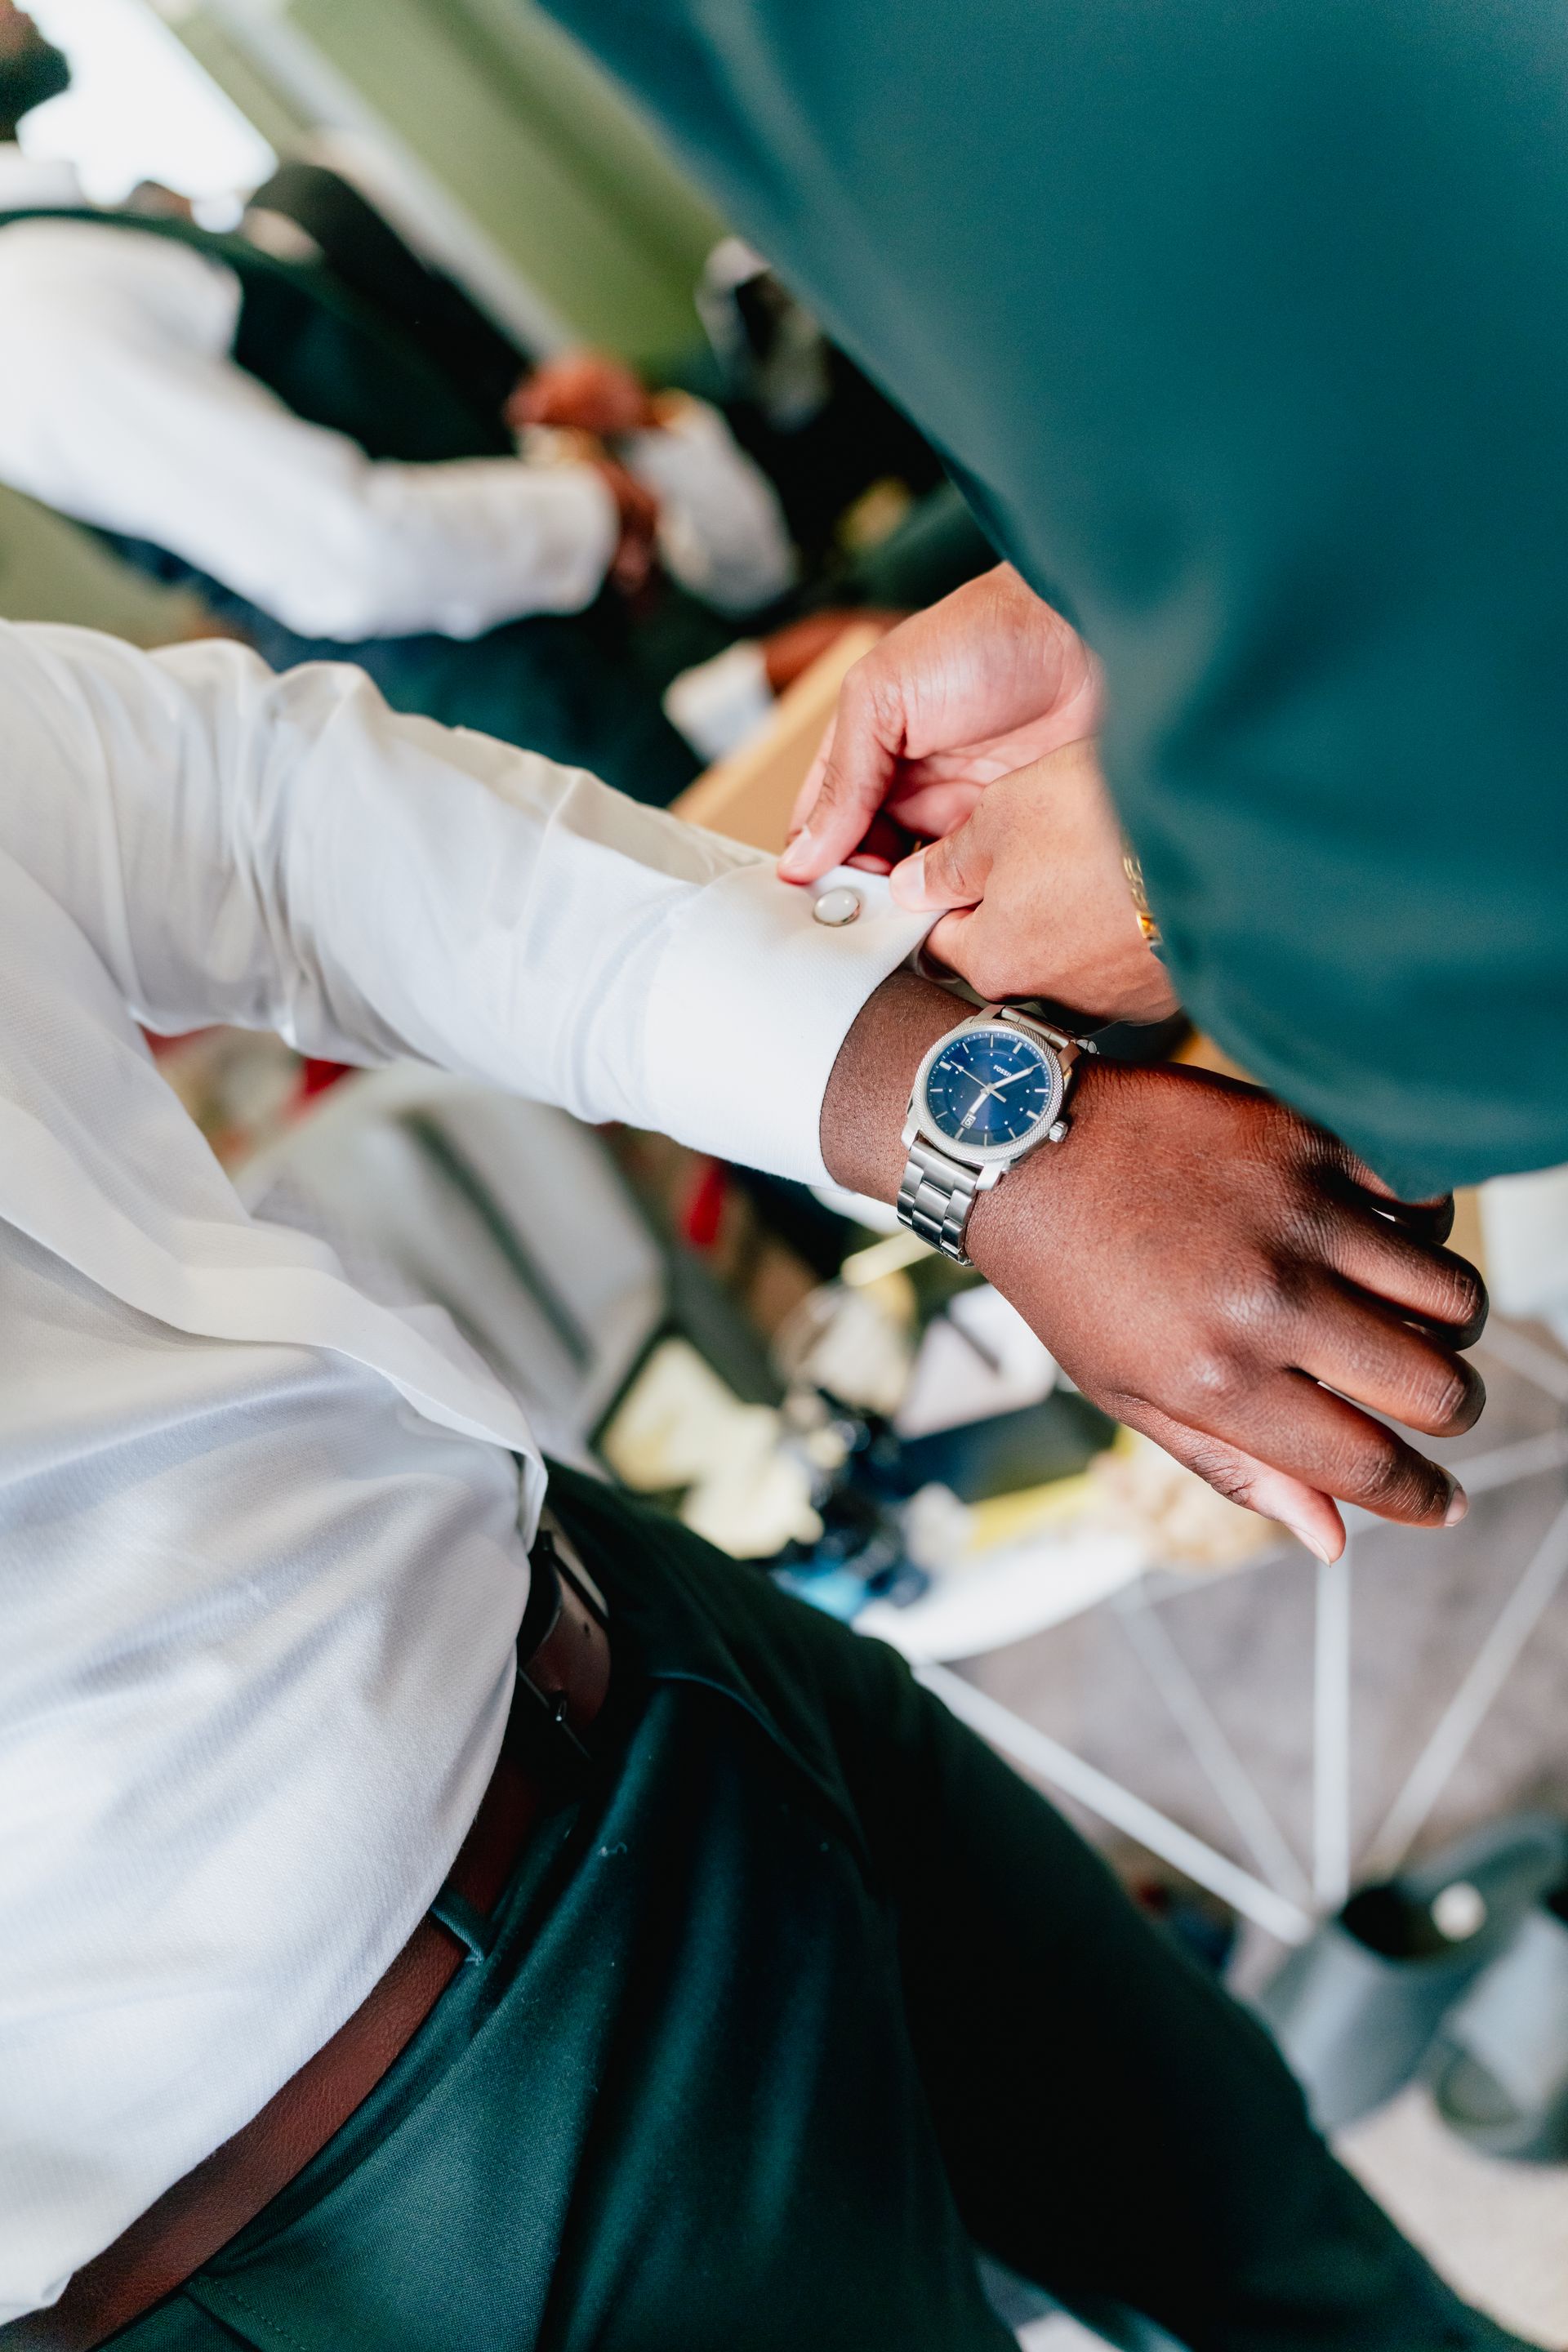 A groom wearing a watch is getting ready for a wedding.